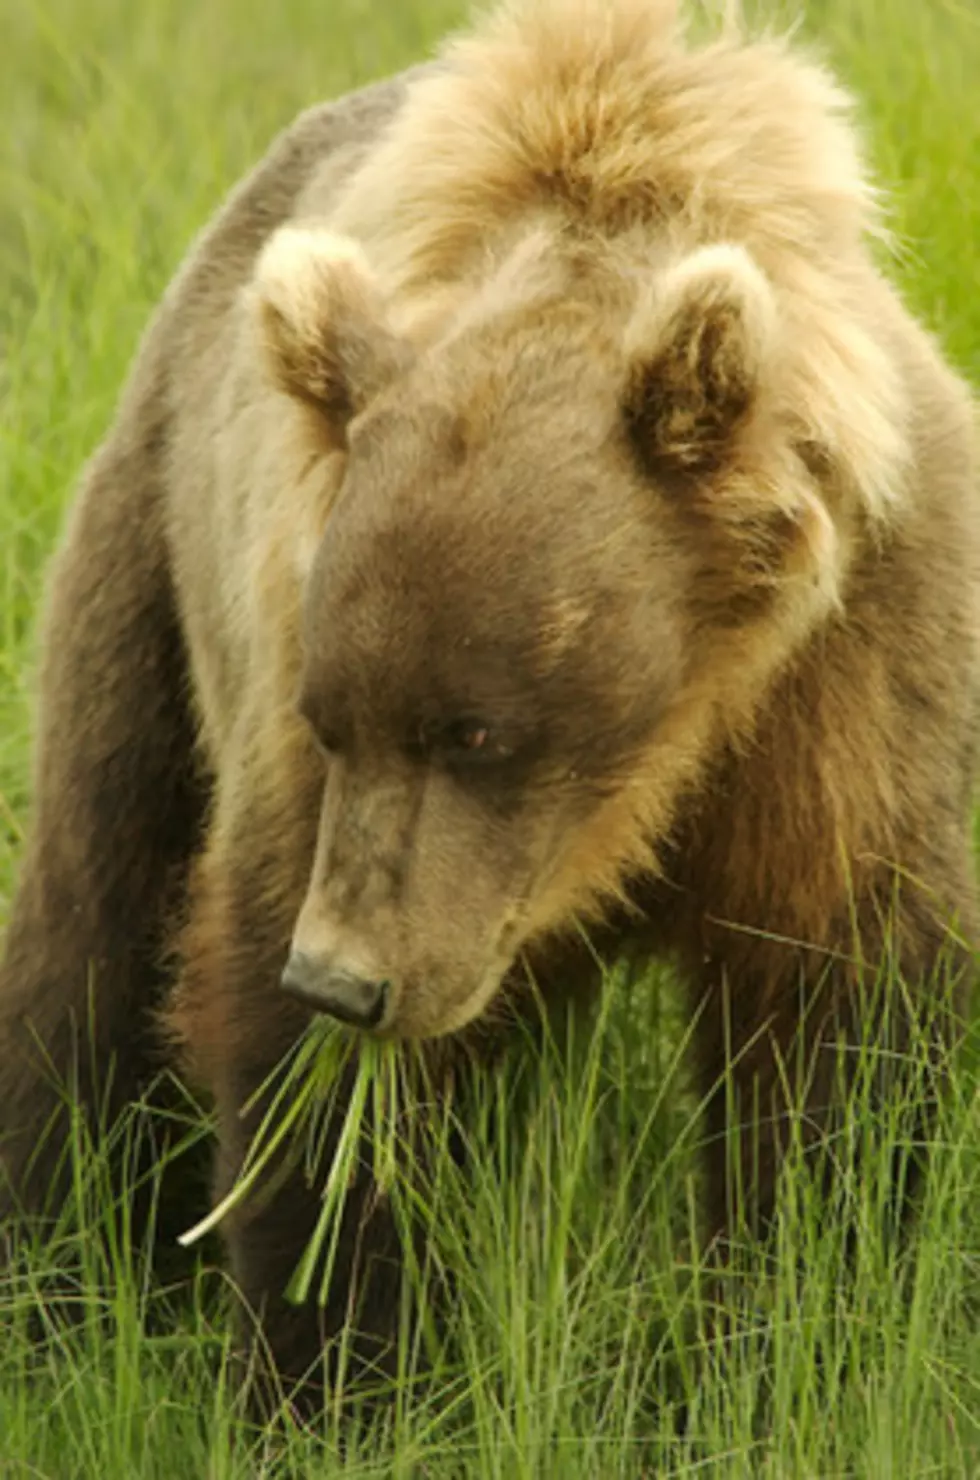 Greater Yellowstone Grizzly Bear Count Estimated at 714